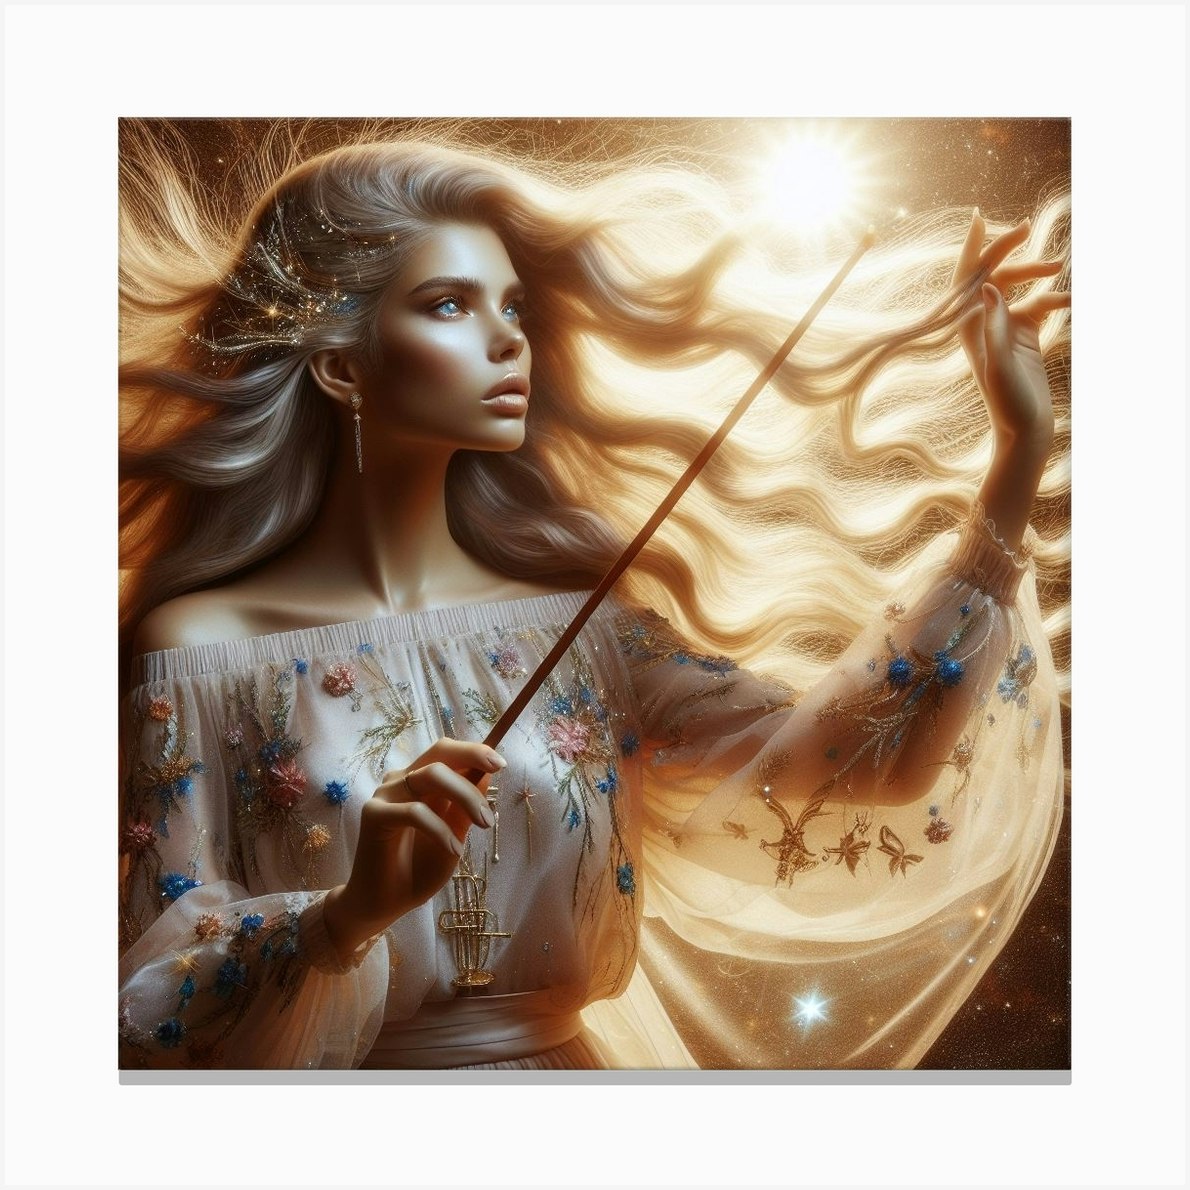 Wand Of Magic Canvas Print by Zokilijo - Fy